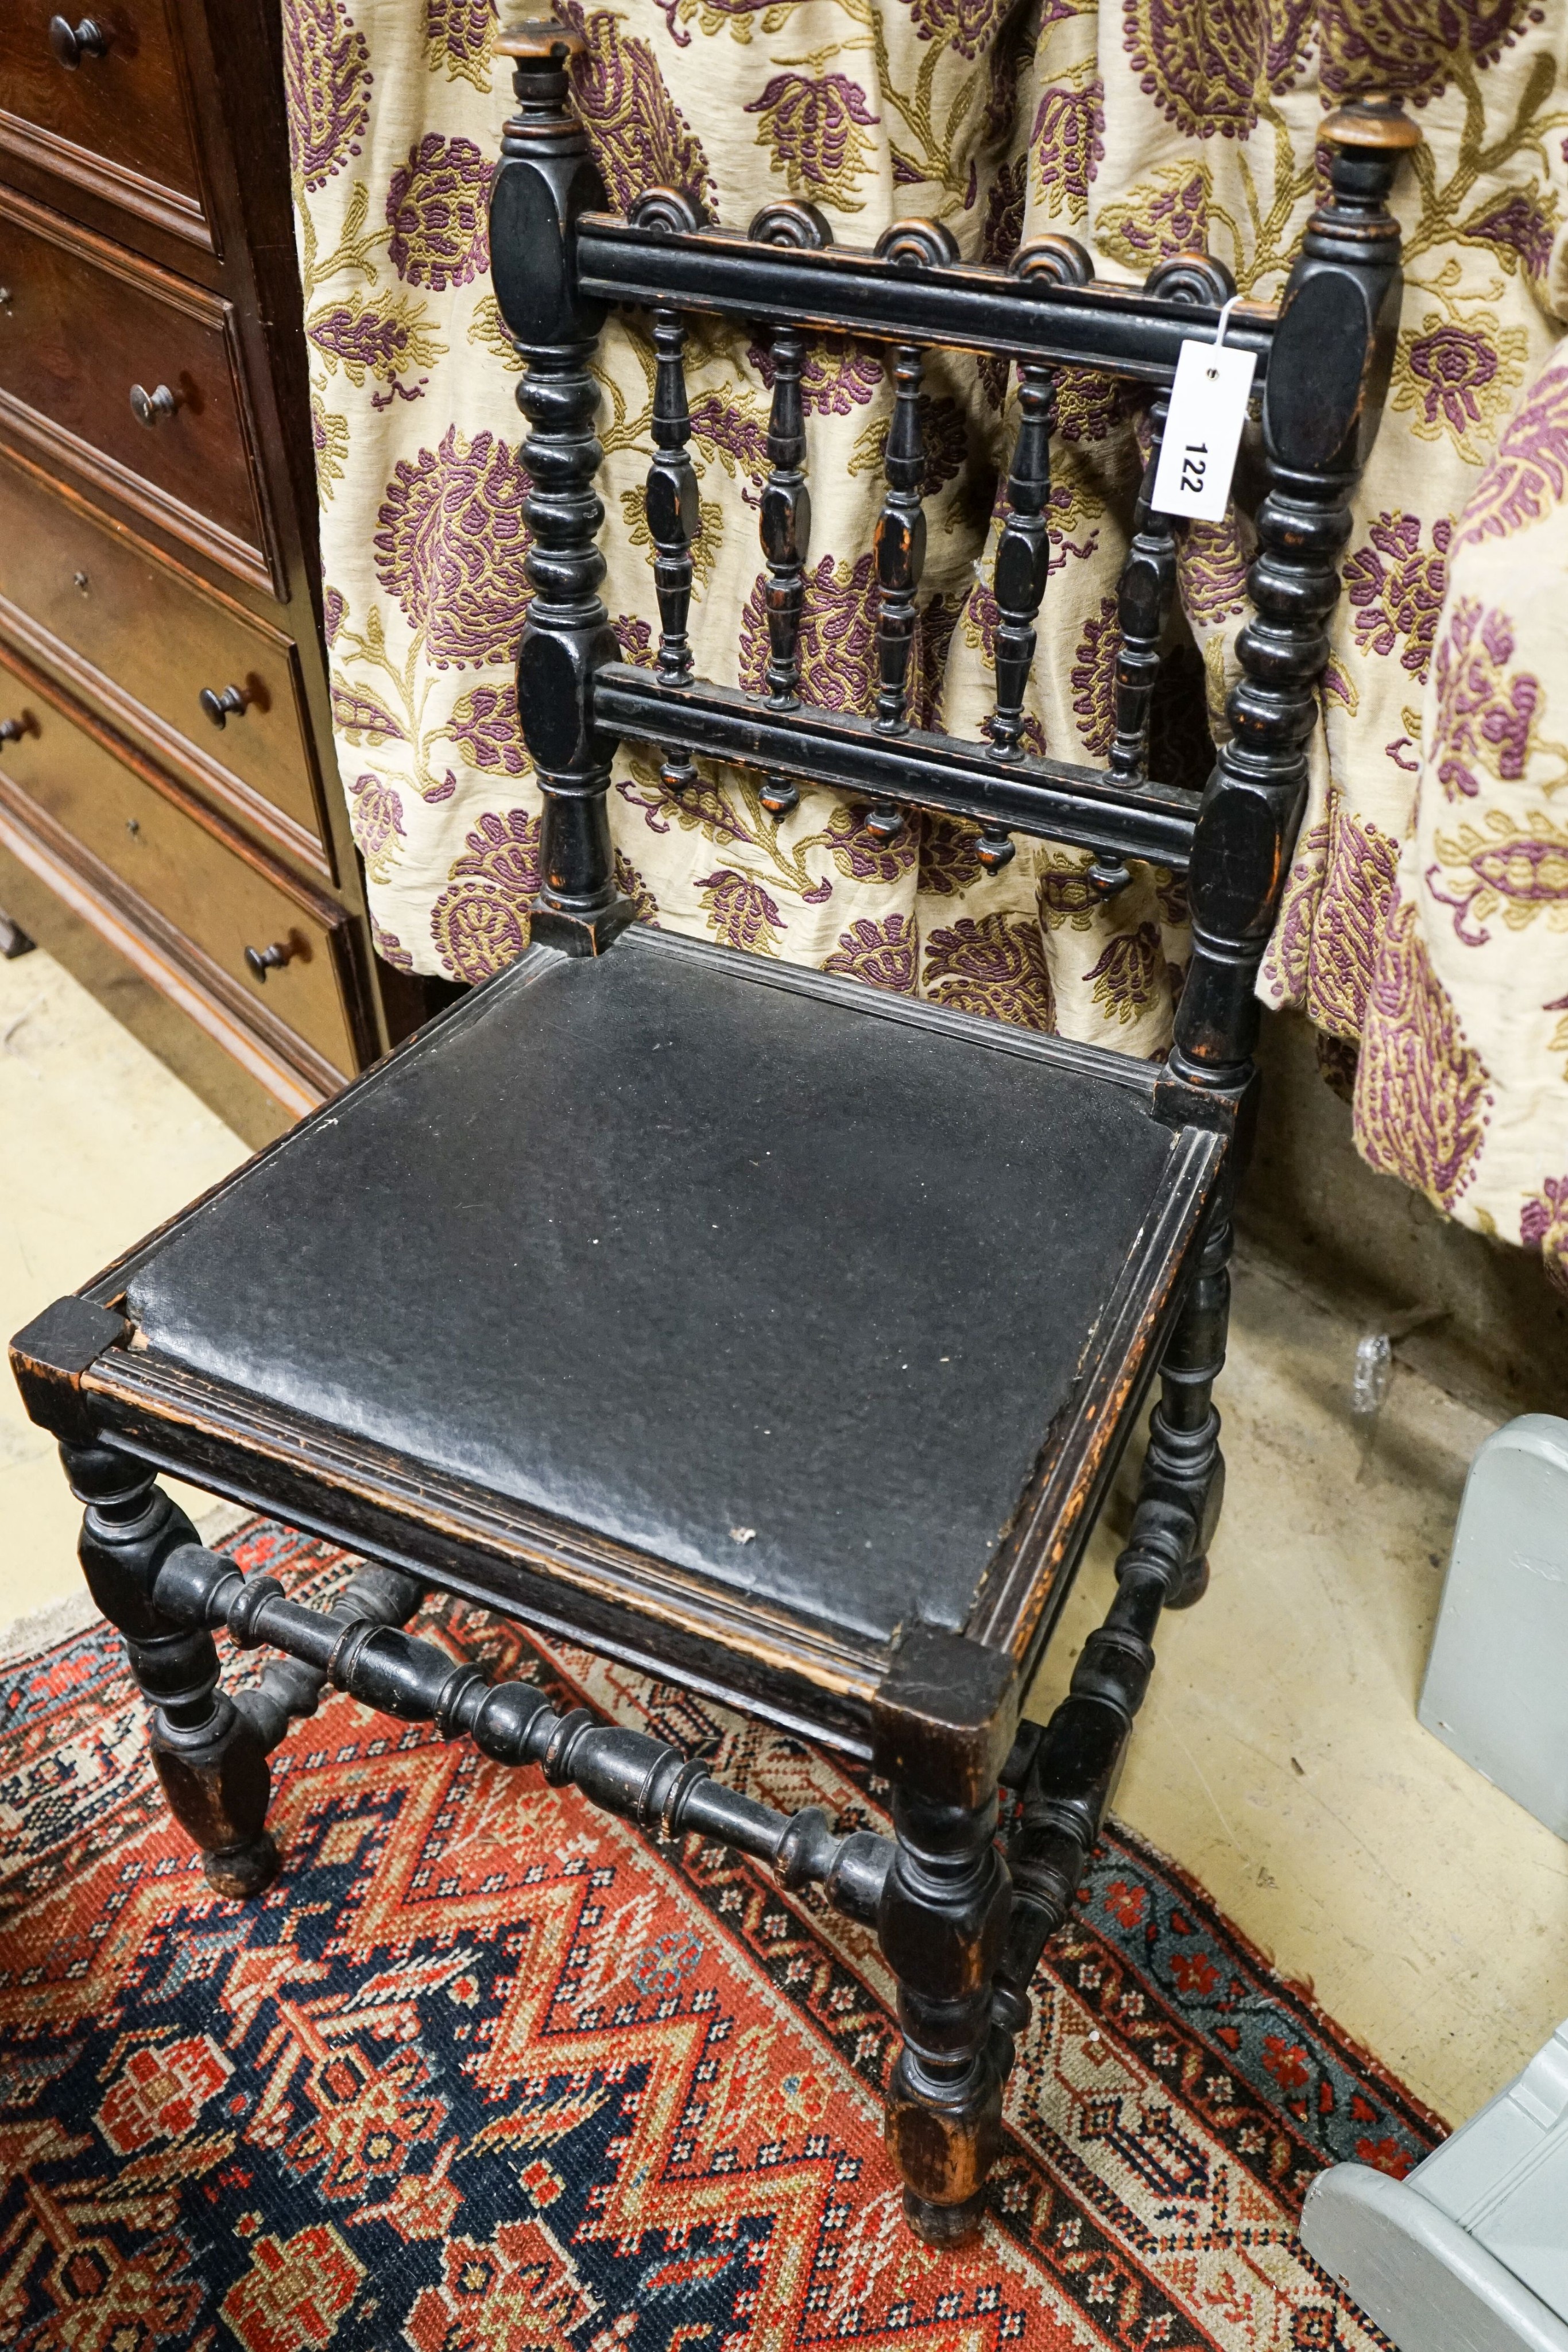 An ebonised beech chair designed by Edward Blore for Lambeth Palace. made by Gillow & Co. original oil cloth seat. Bears an ivorine plaque, 'Lambeth Palace'                                                                